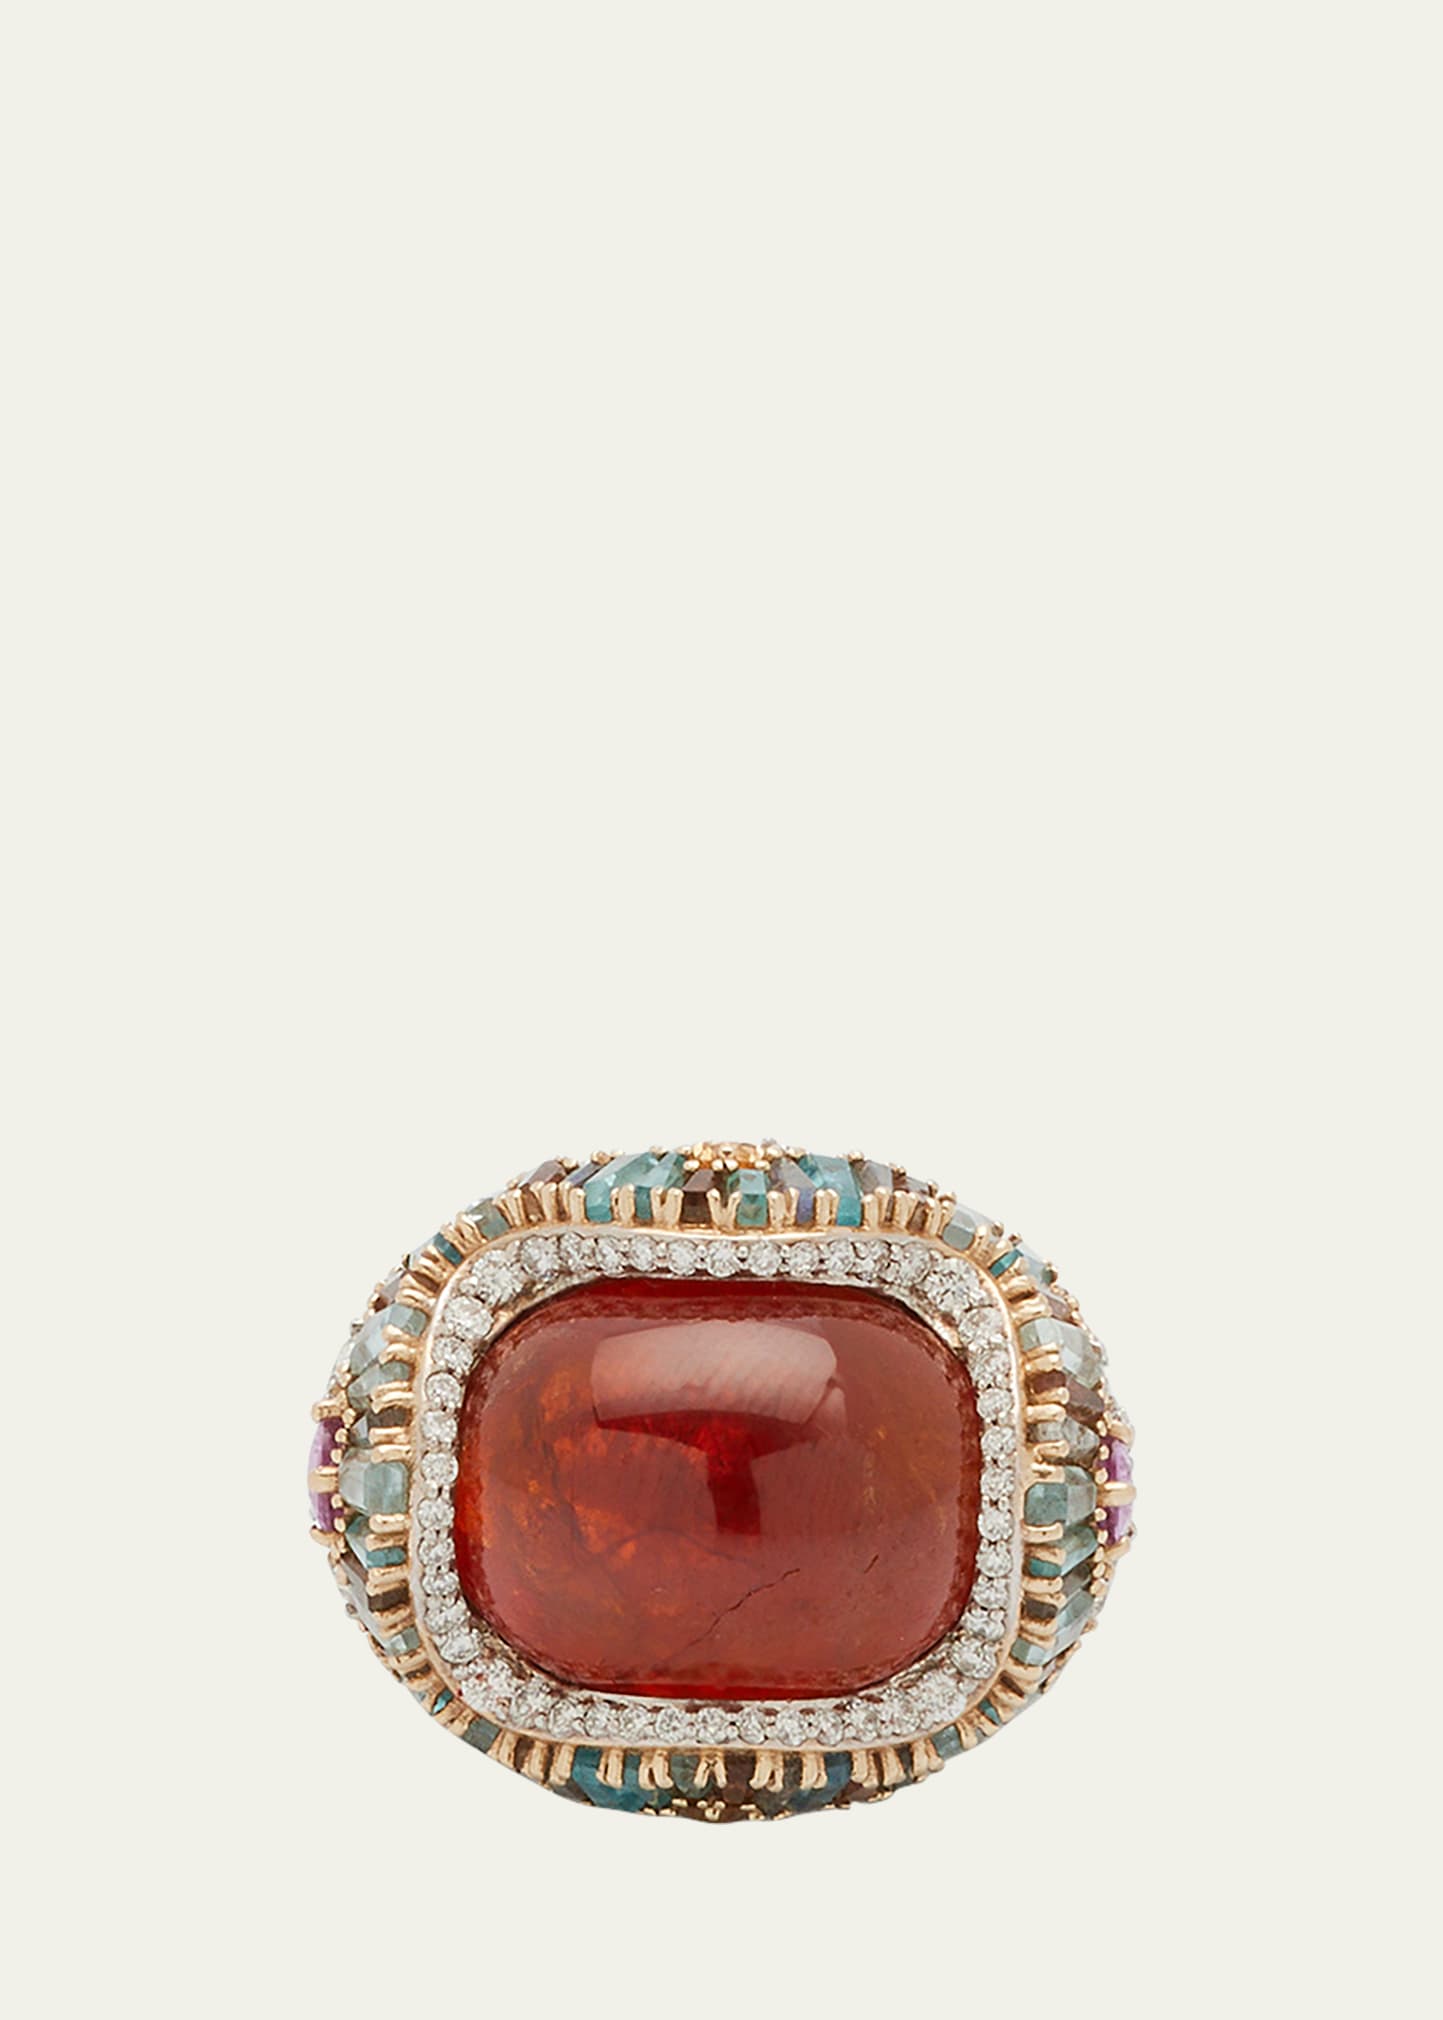 Roman Encrusted Ring with Spessartite and Multicolor Stones, Size 7